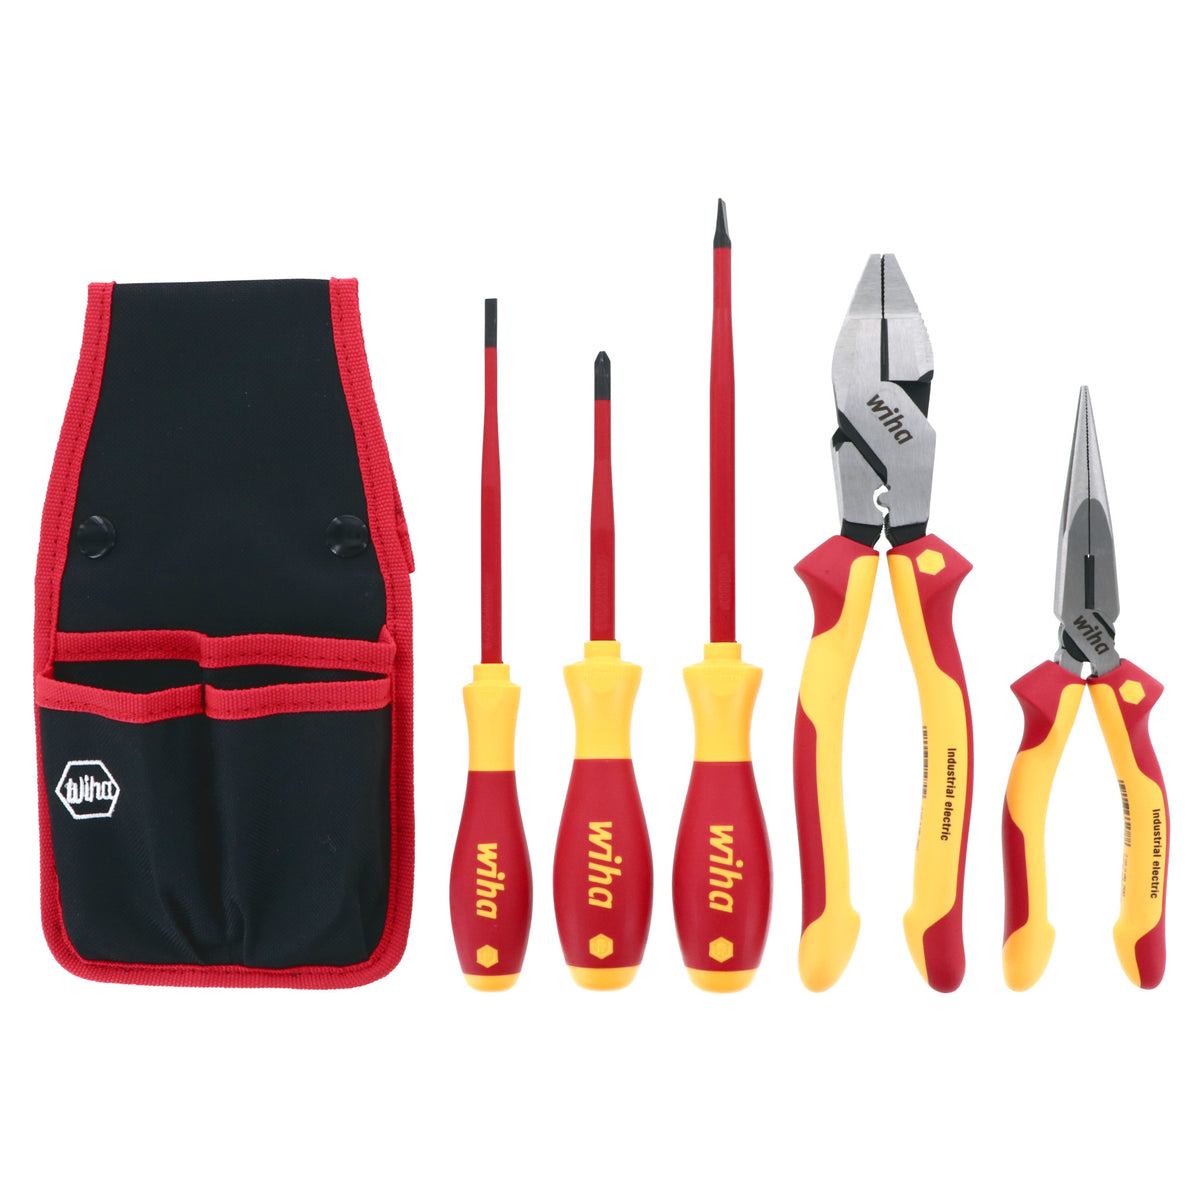 Wiha 32892 Insulated Pliers/Cutters & Drivers Set